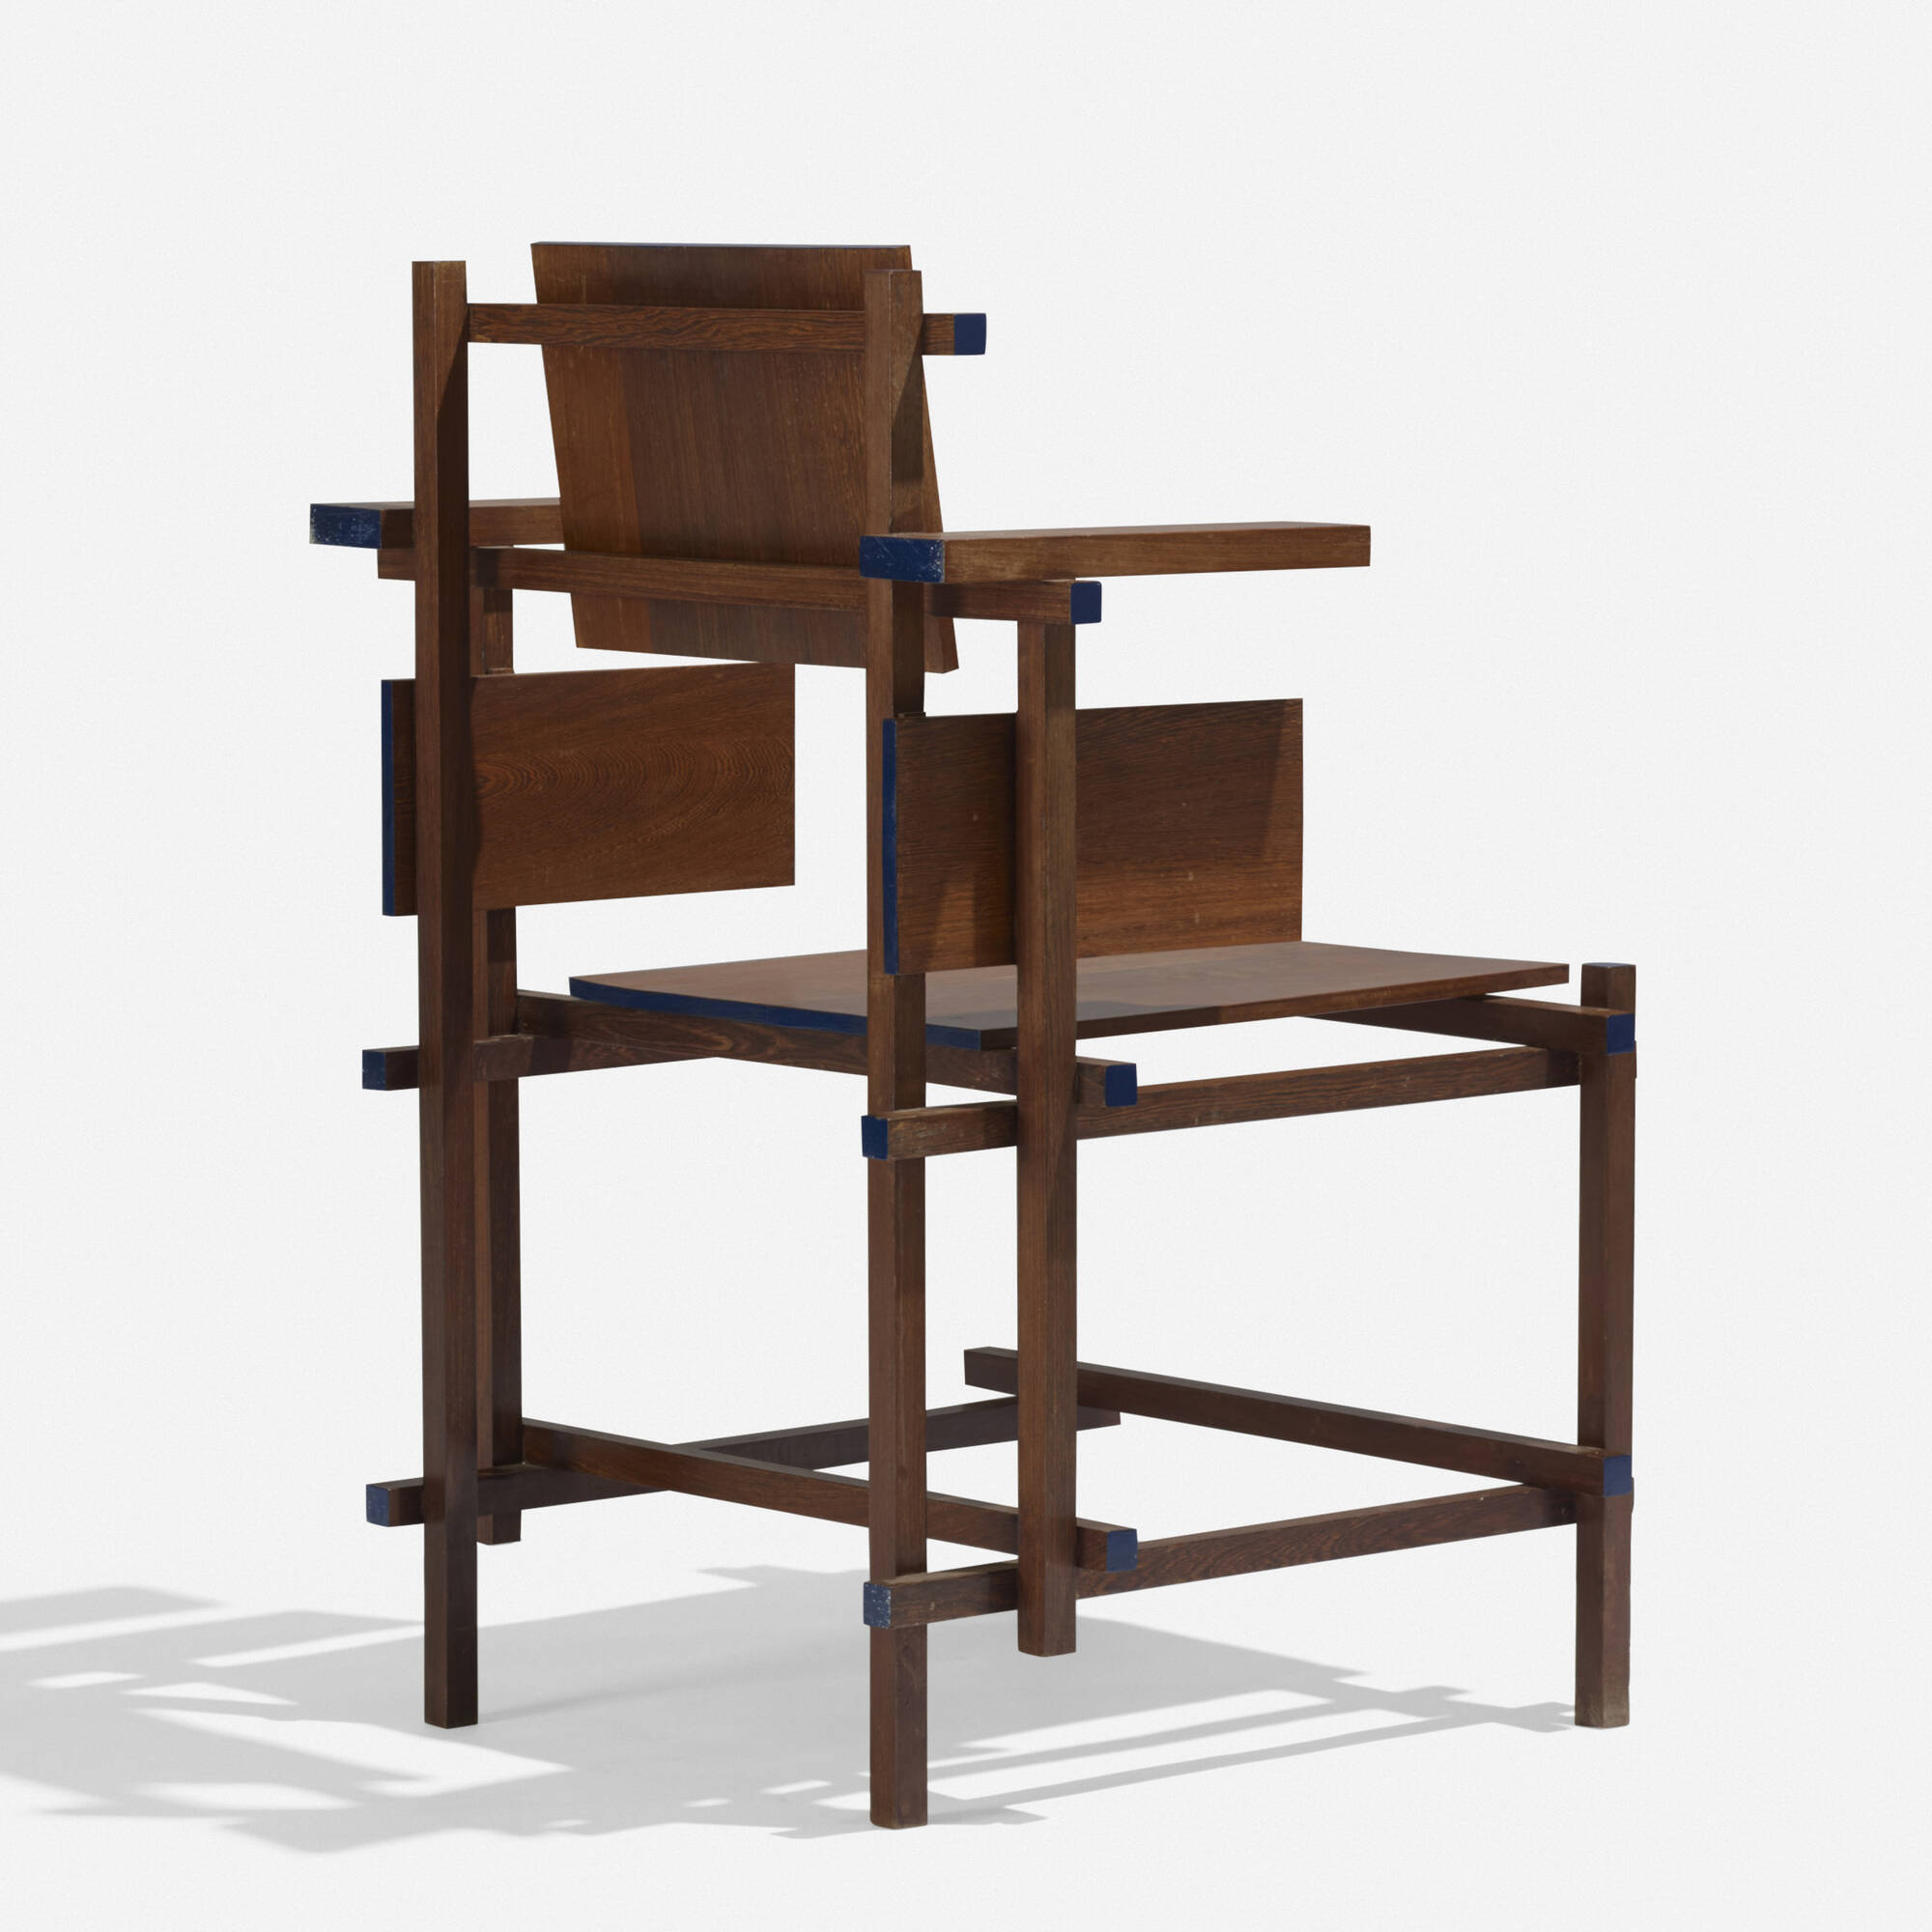 107: GERRIT RIETVELD, Hoge Stoel International The Boyd Collection, 7 November 2019 < Auctions Auctions of Art and Design